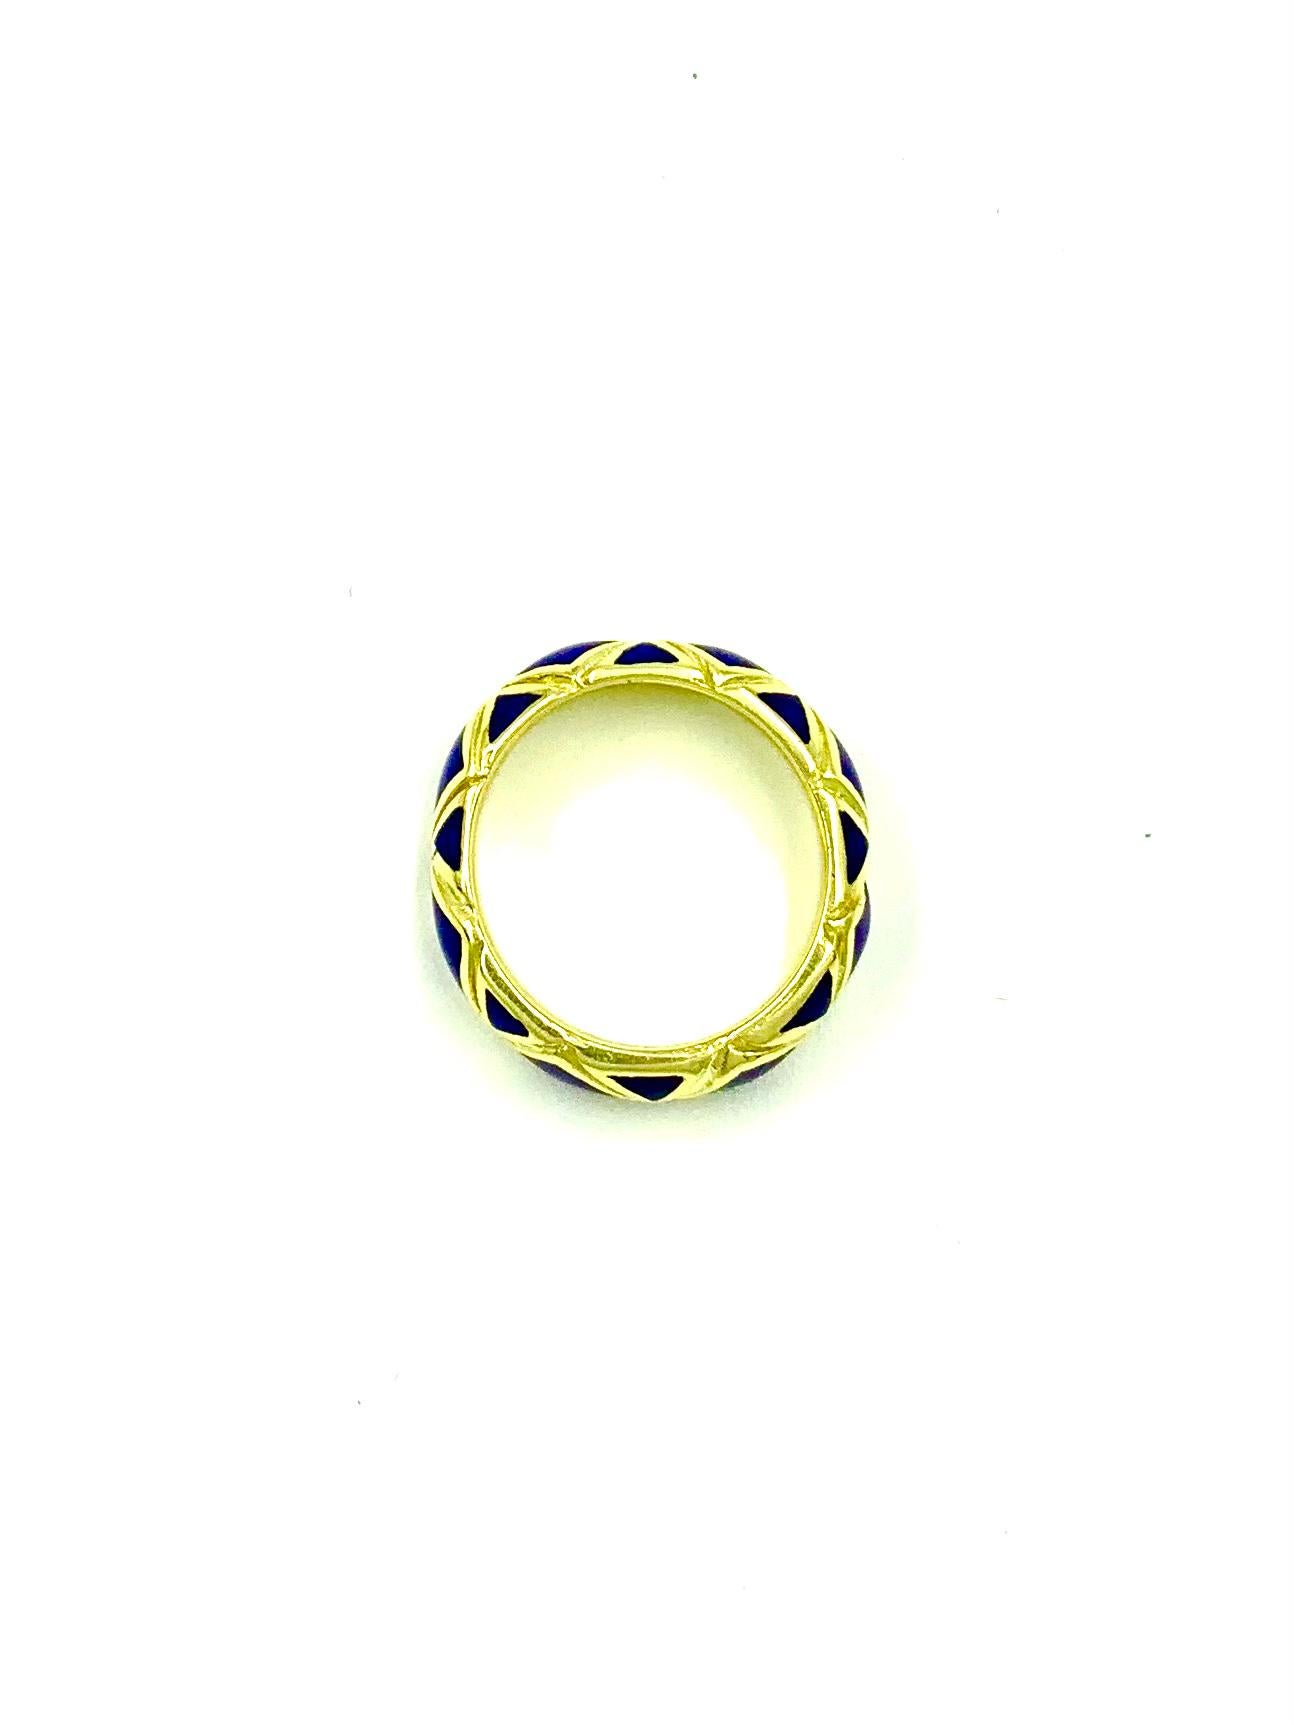 Estate Tiffany & Co. 18K yellow gold and cobalt blue enamel X pattern band ring.
Excellent condition
Marks: 18K, Tiffany on the interior of band
Size 5US
7mm wide